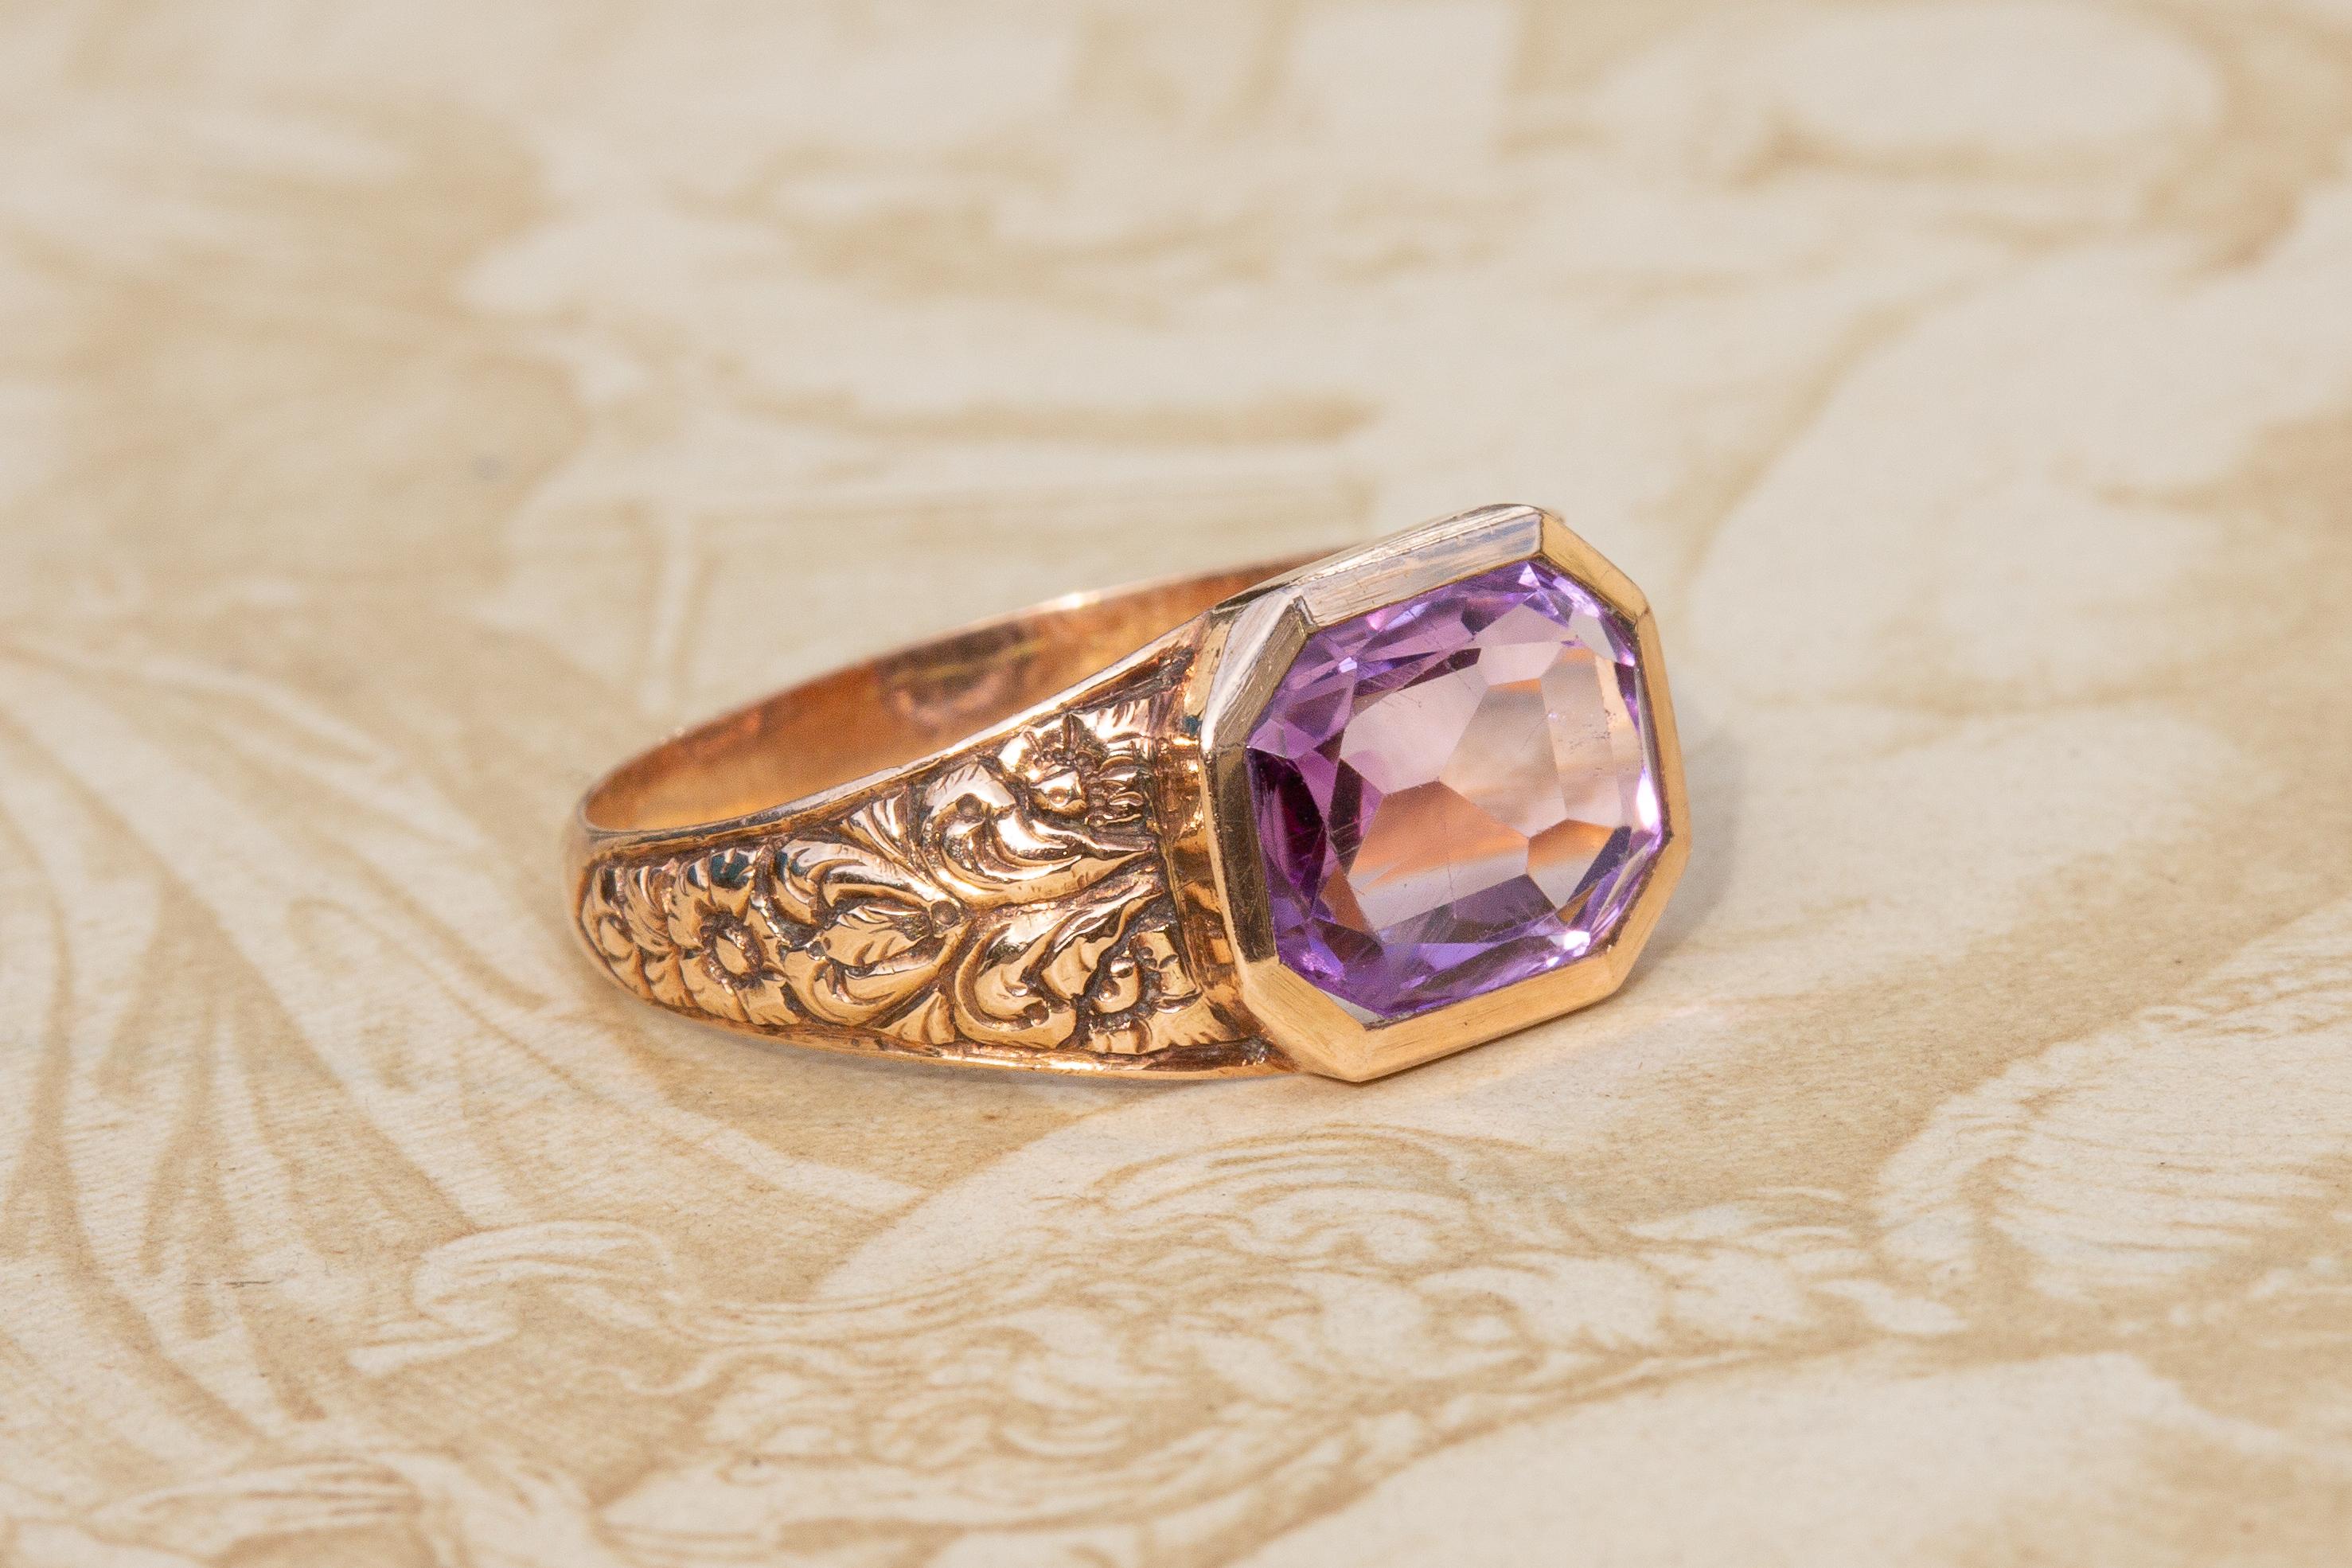 Women's or Men's Stunning Antique Victorian 19th Century 14k Gold and Amethyst Ring